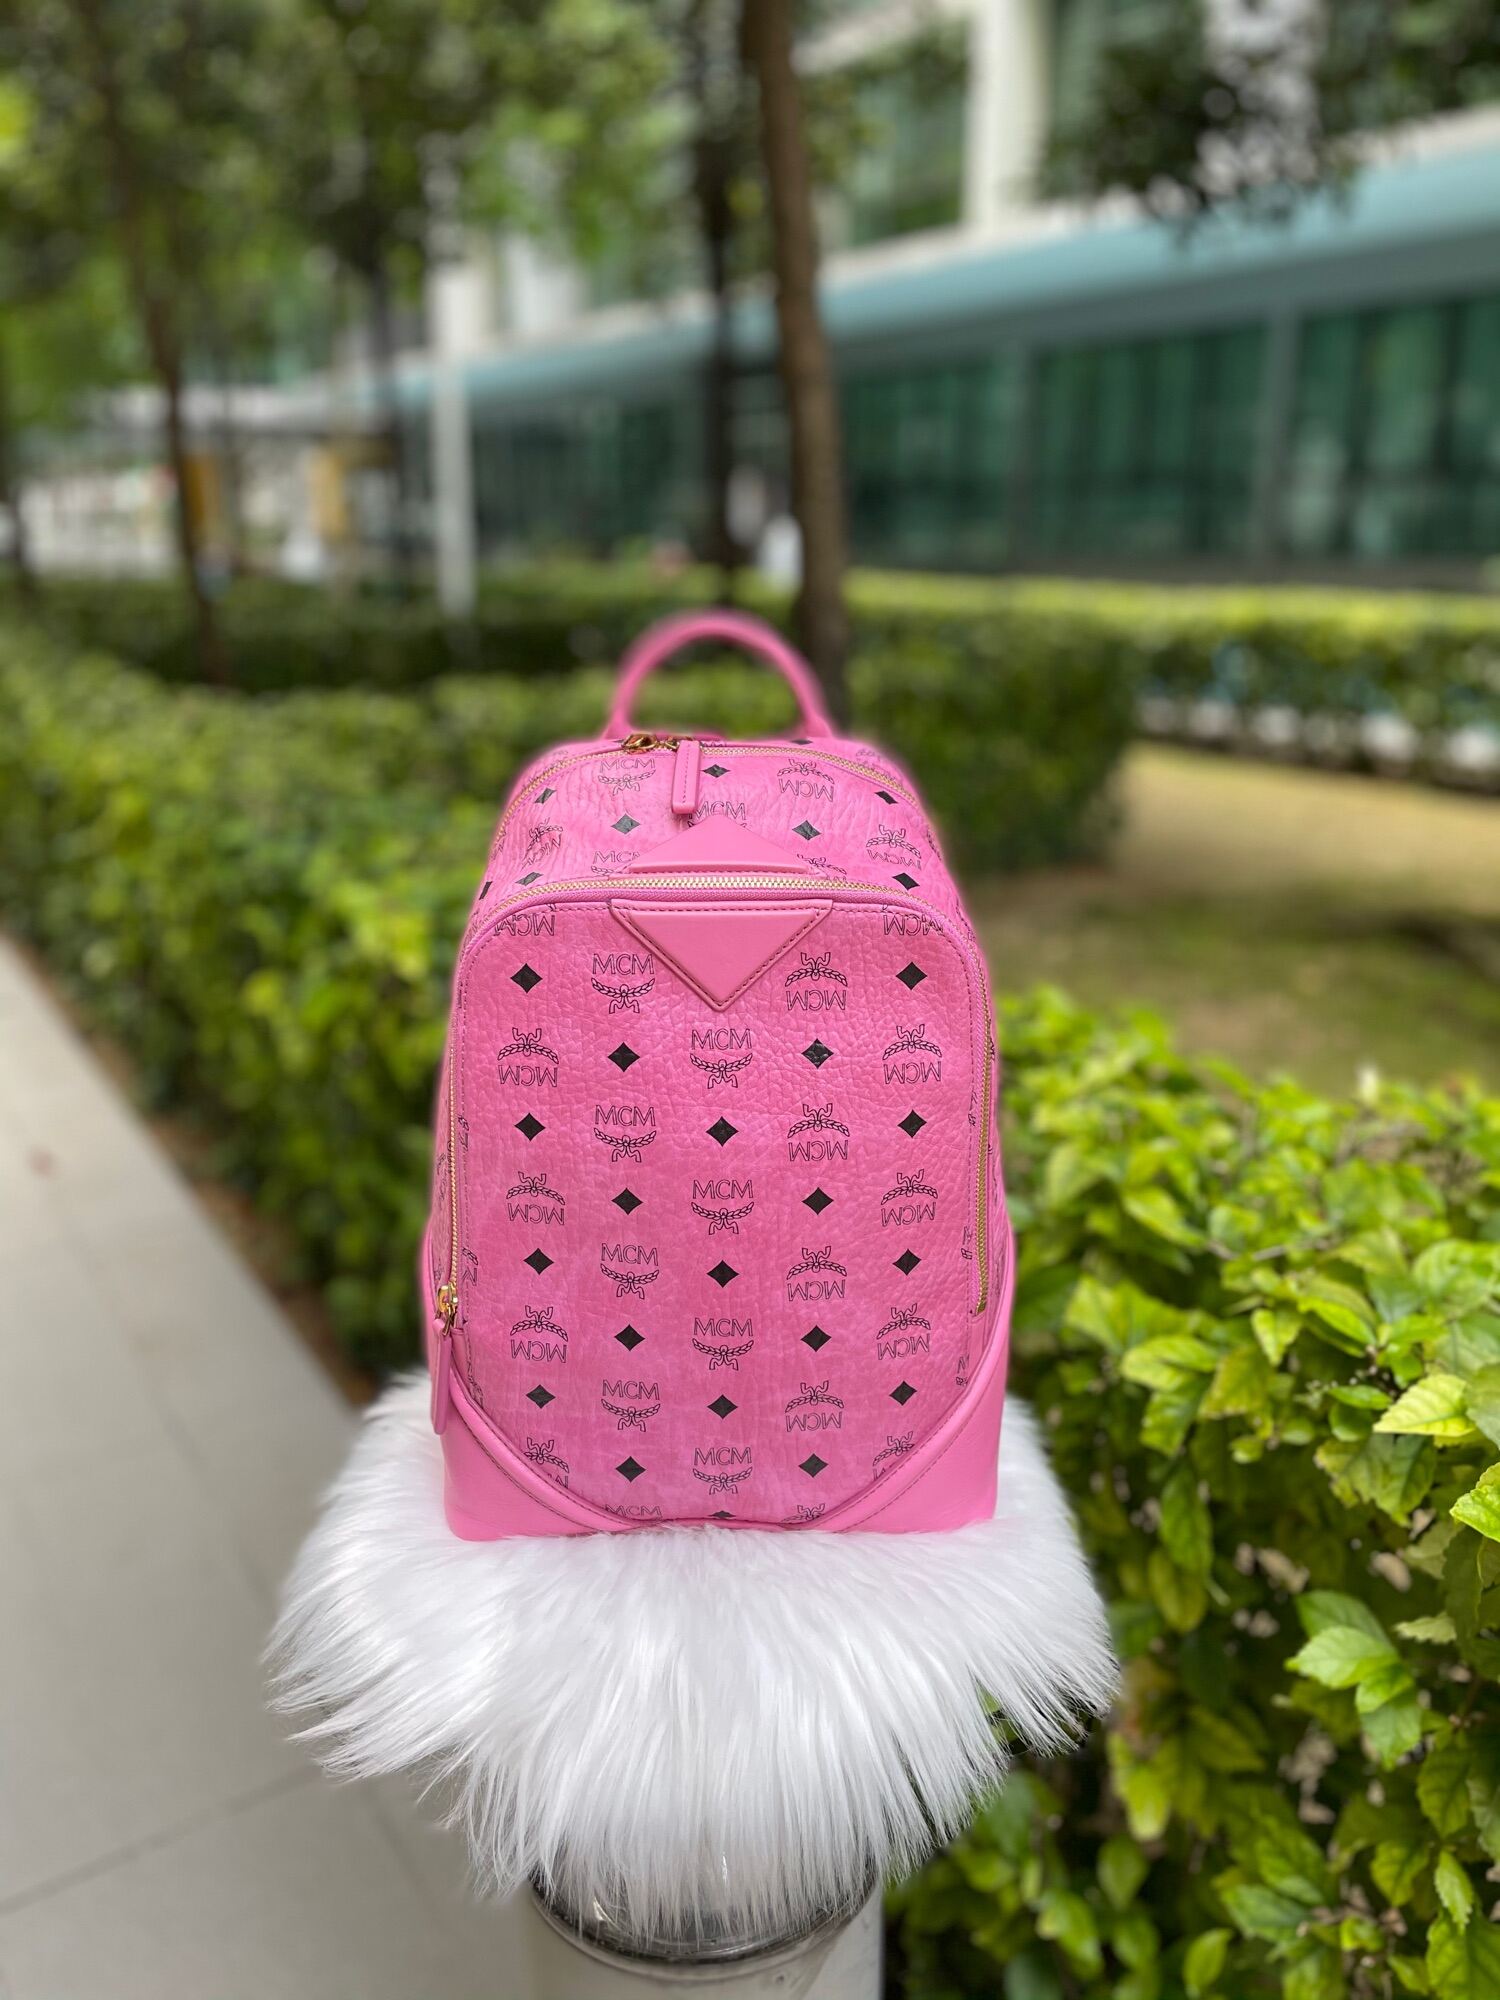 Authentic M C M Small Duke Visetos Backpack In Pink